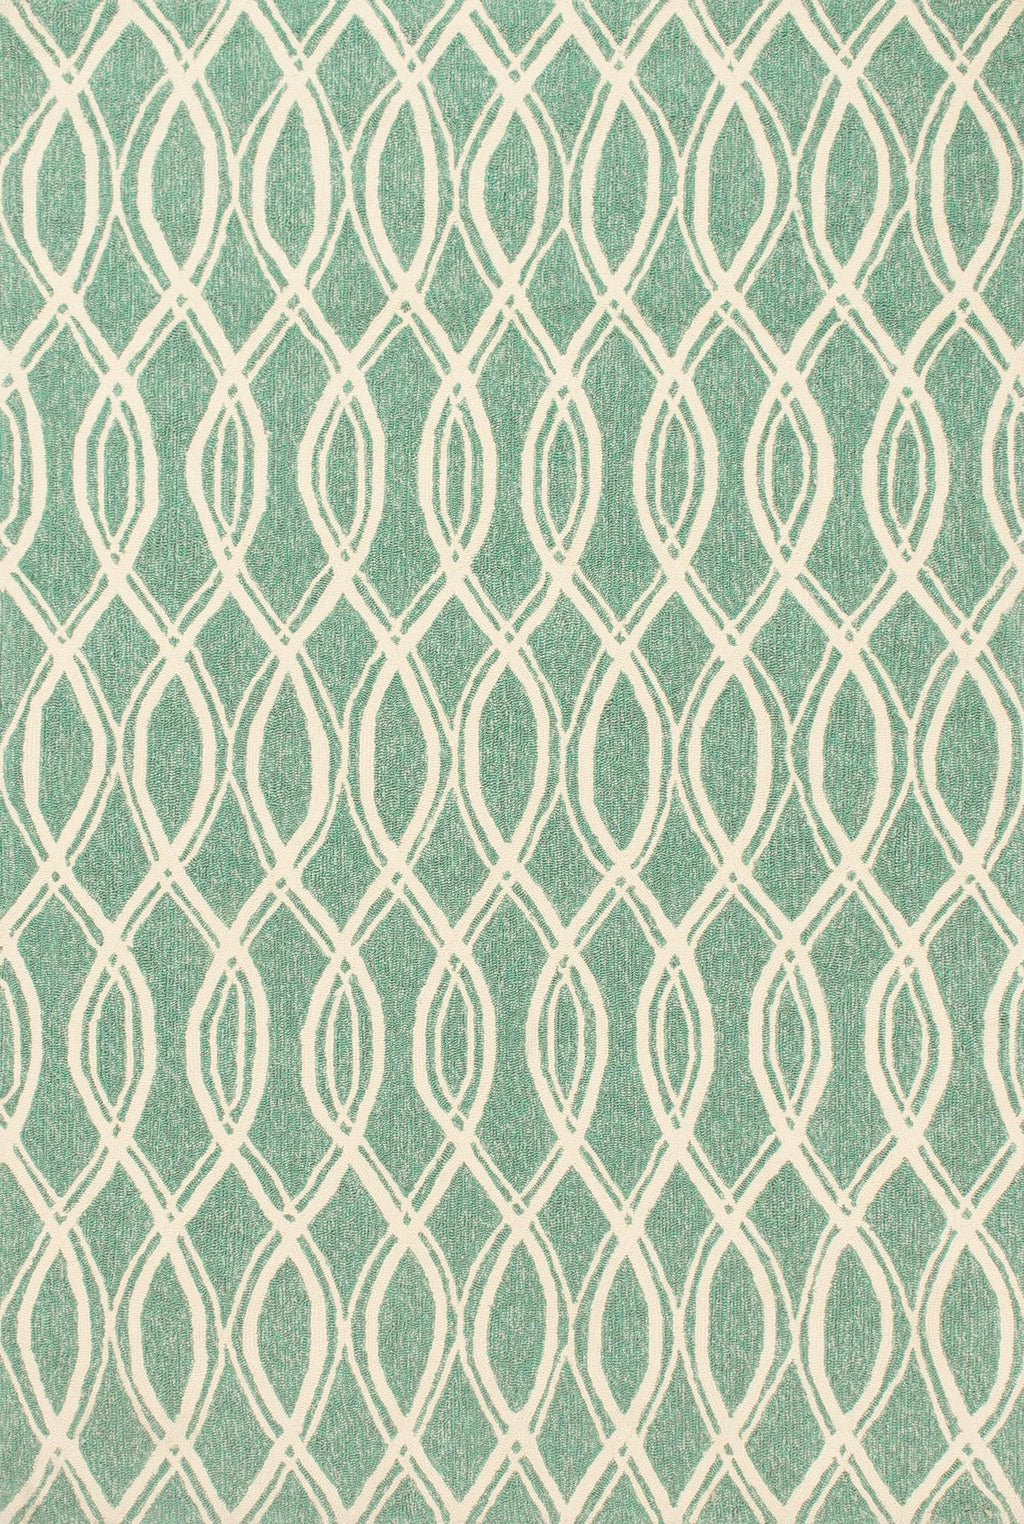 VENICE BEACH Collection Rug  in  TURQUOISE / IVORY Blue Small Hand-Hooked Polypropylene